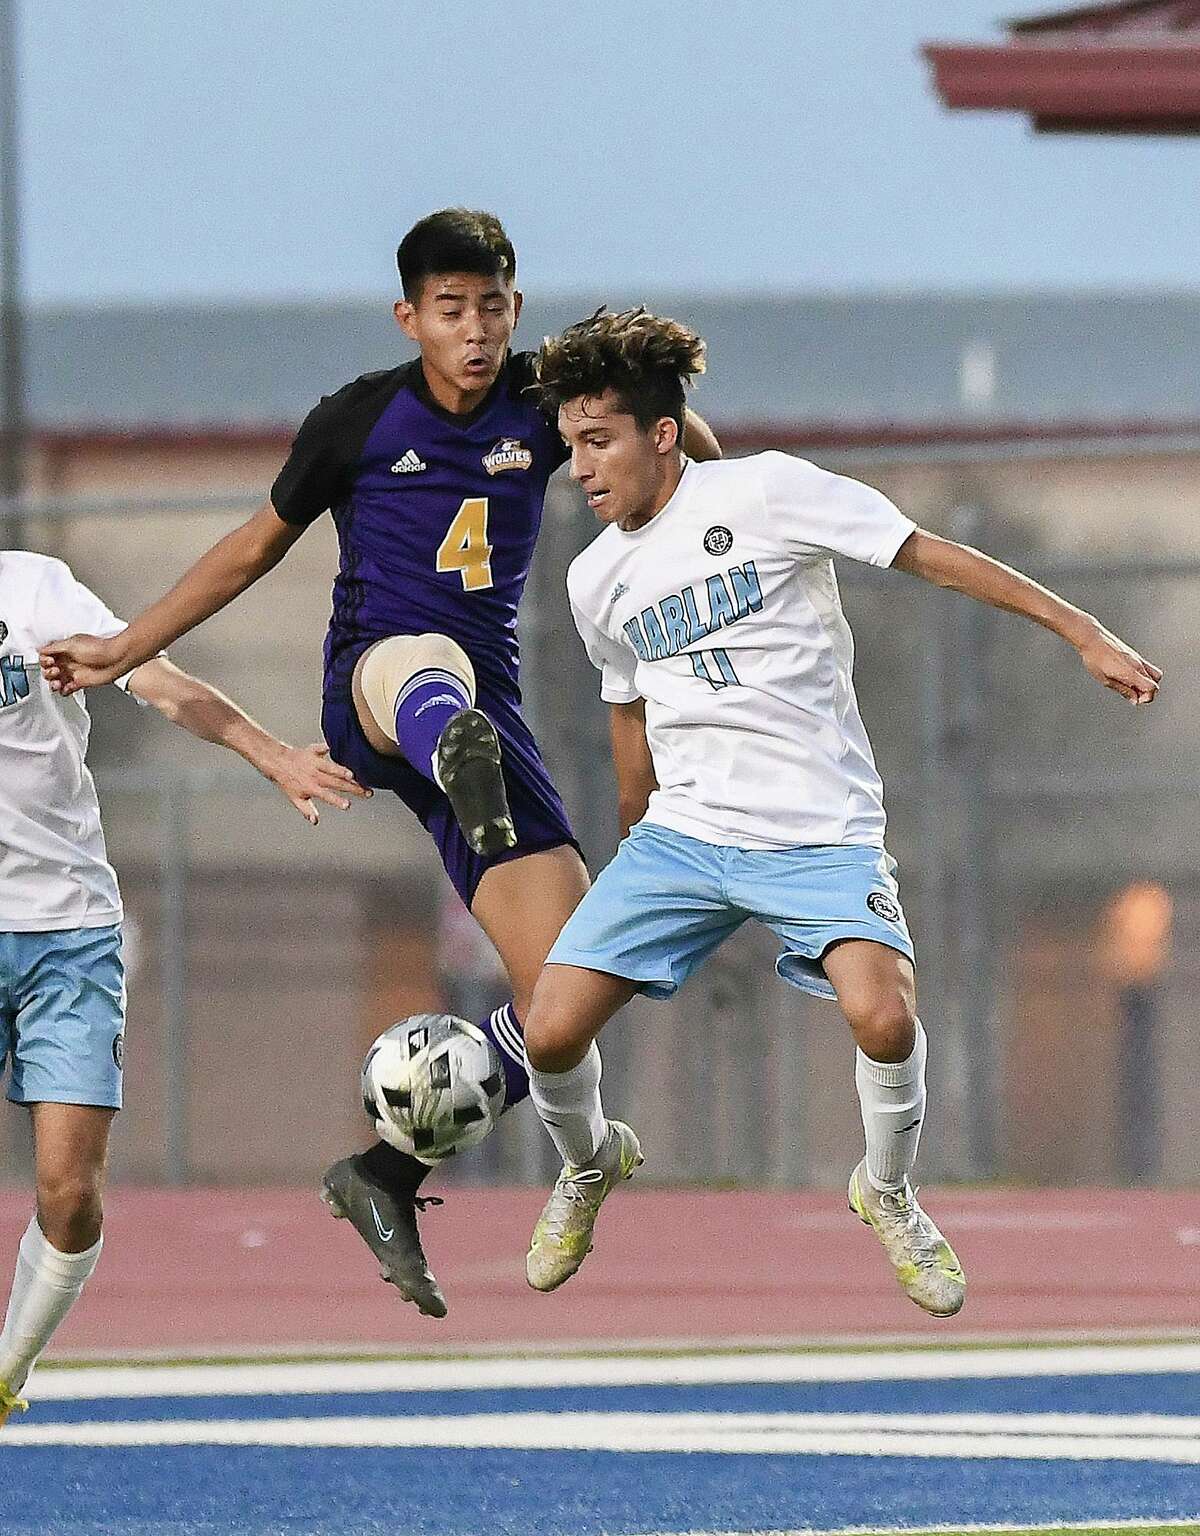 Lyndon B. Johnson High School’s Jonathan Figueroa and Harlan High School’s Edgar Paz-Torres go for the kick mid-air, Friday, April 1, 2022 at the UISD Student Activity Complex.